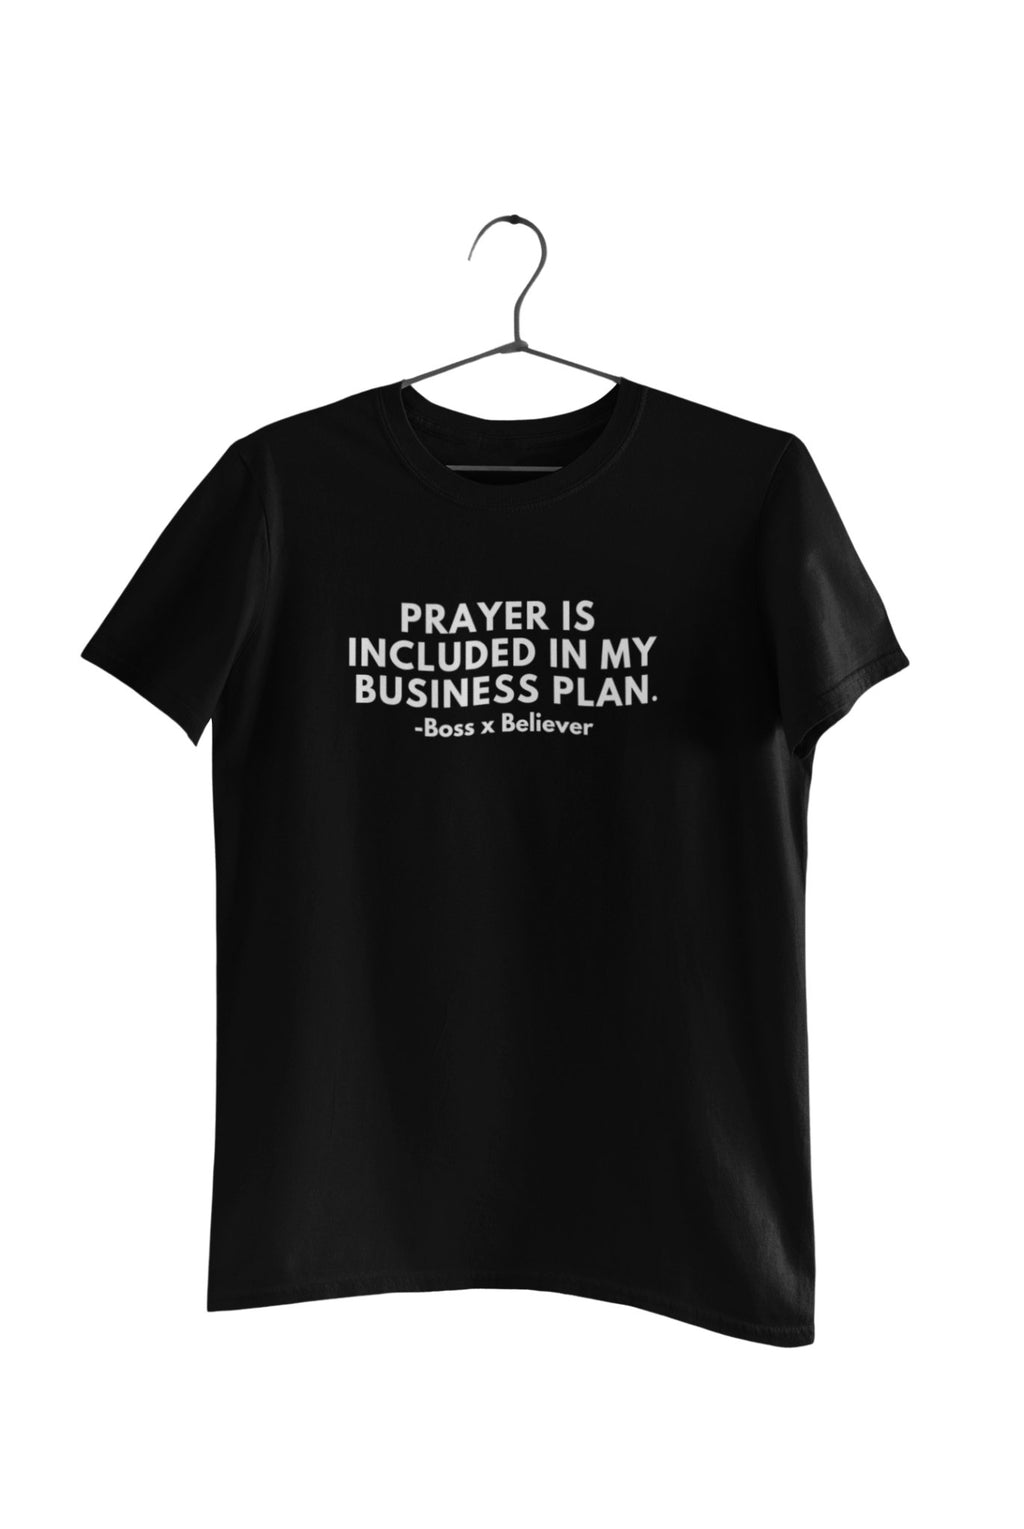 Business Plan Tee - A Meaningful Mood